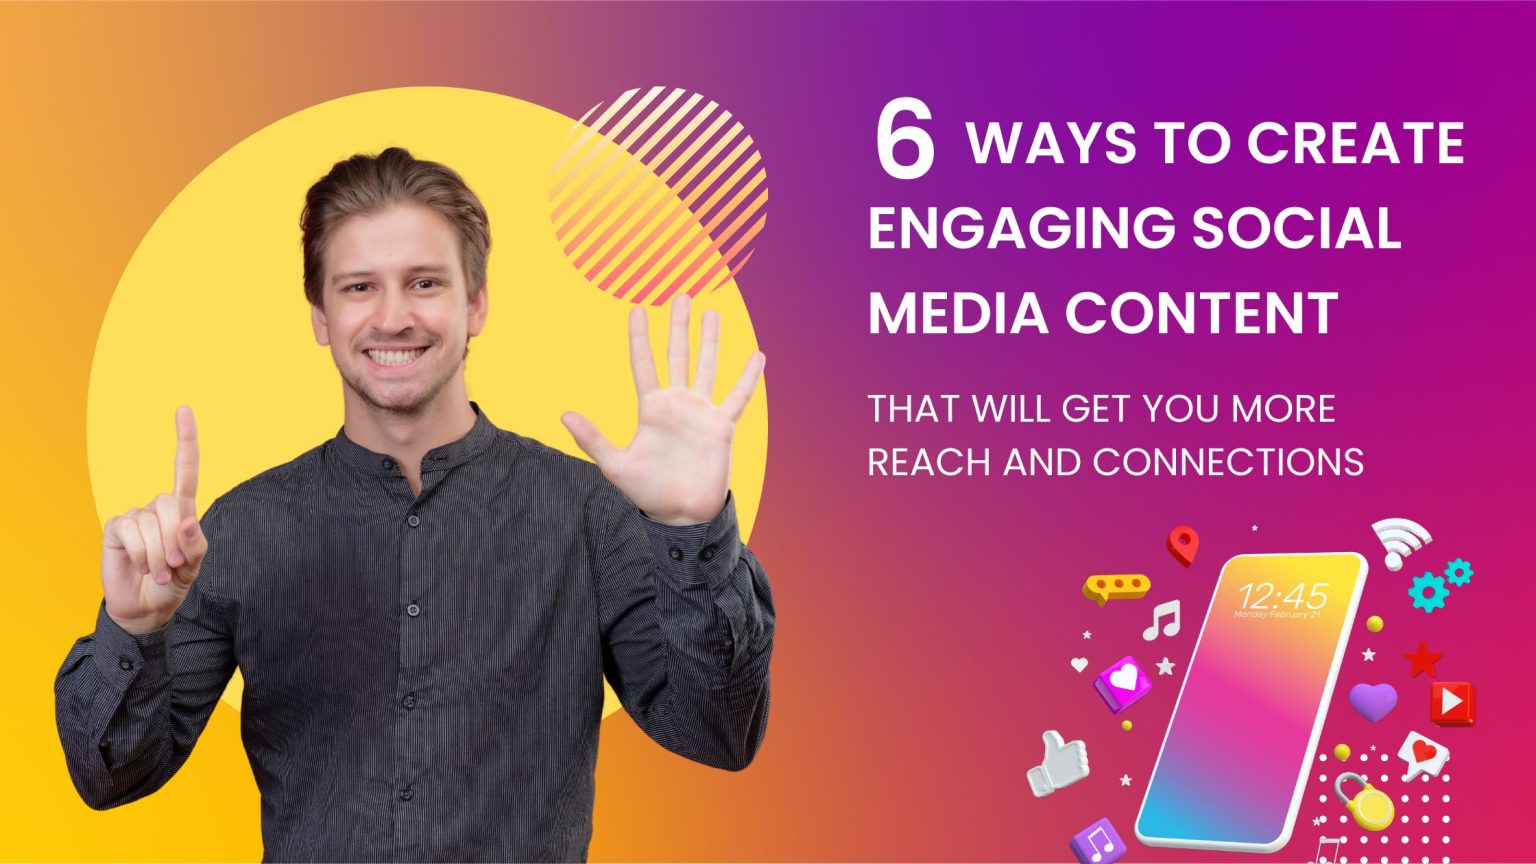 6-ways-to-create-engaging-social-media-content-that-will-get-you-more